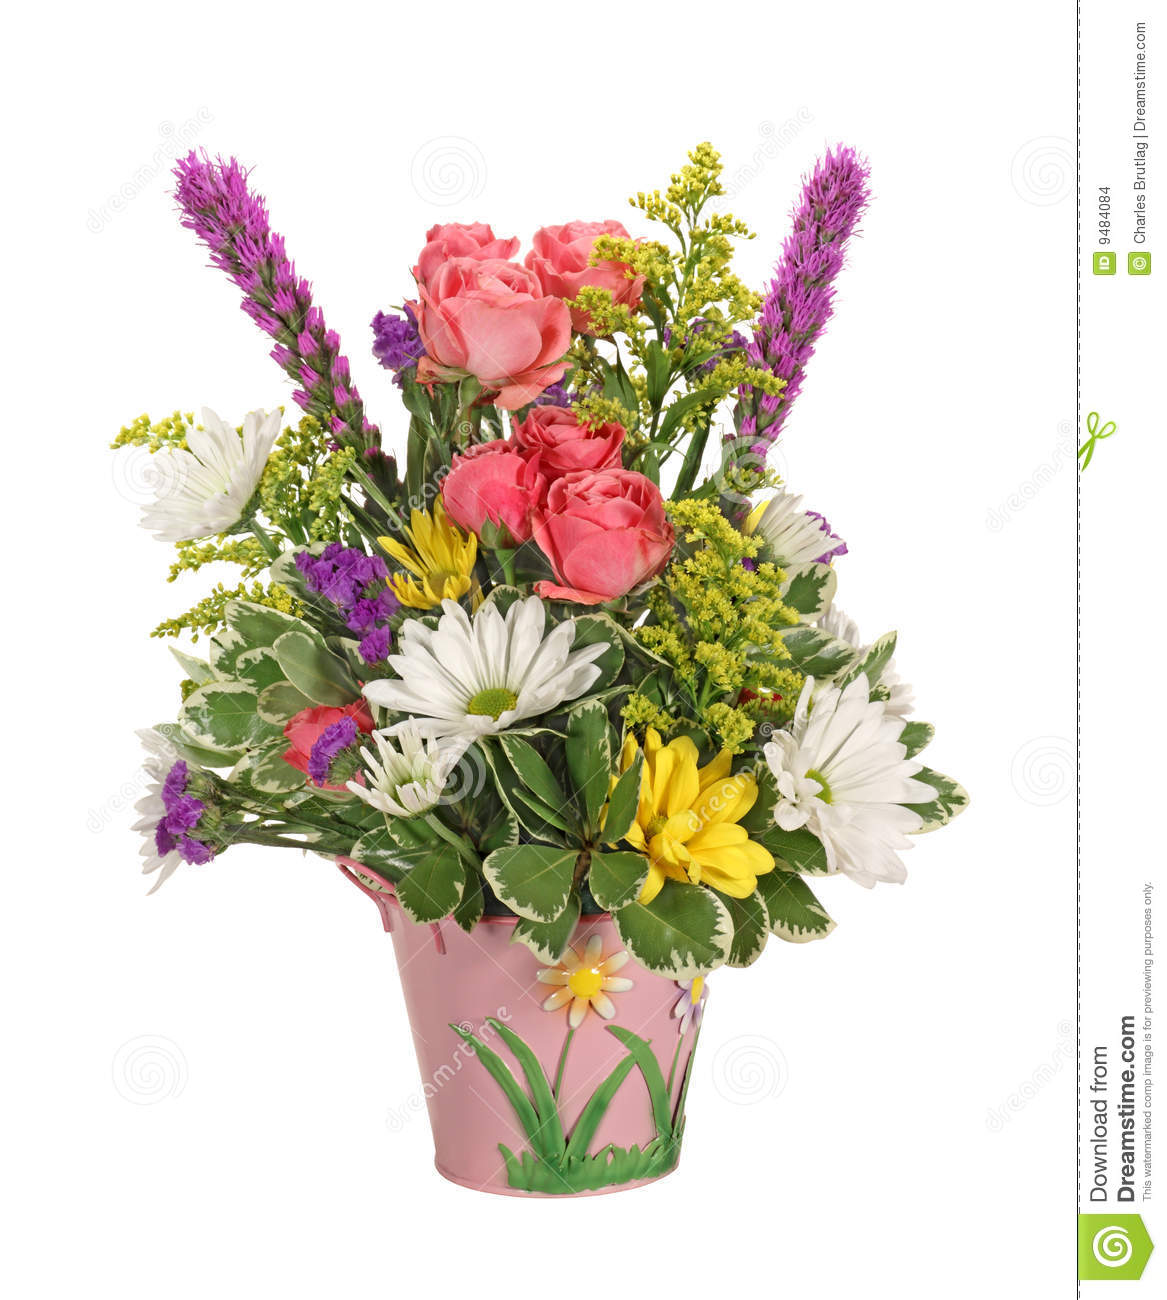 Flower Bouquet Of Roses And Daisies Isolated On White